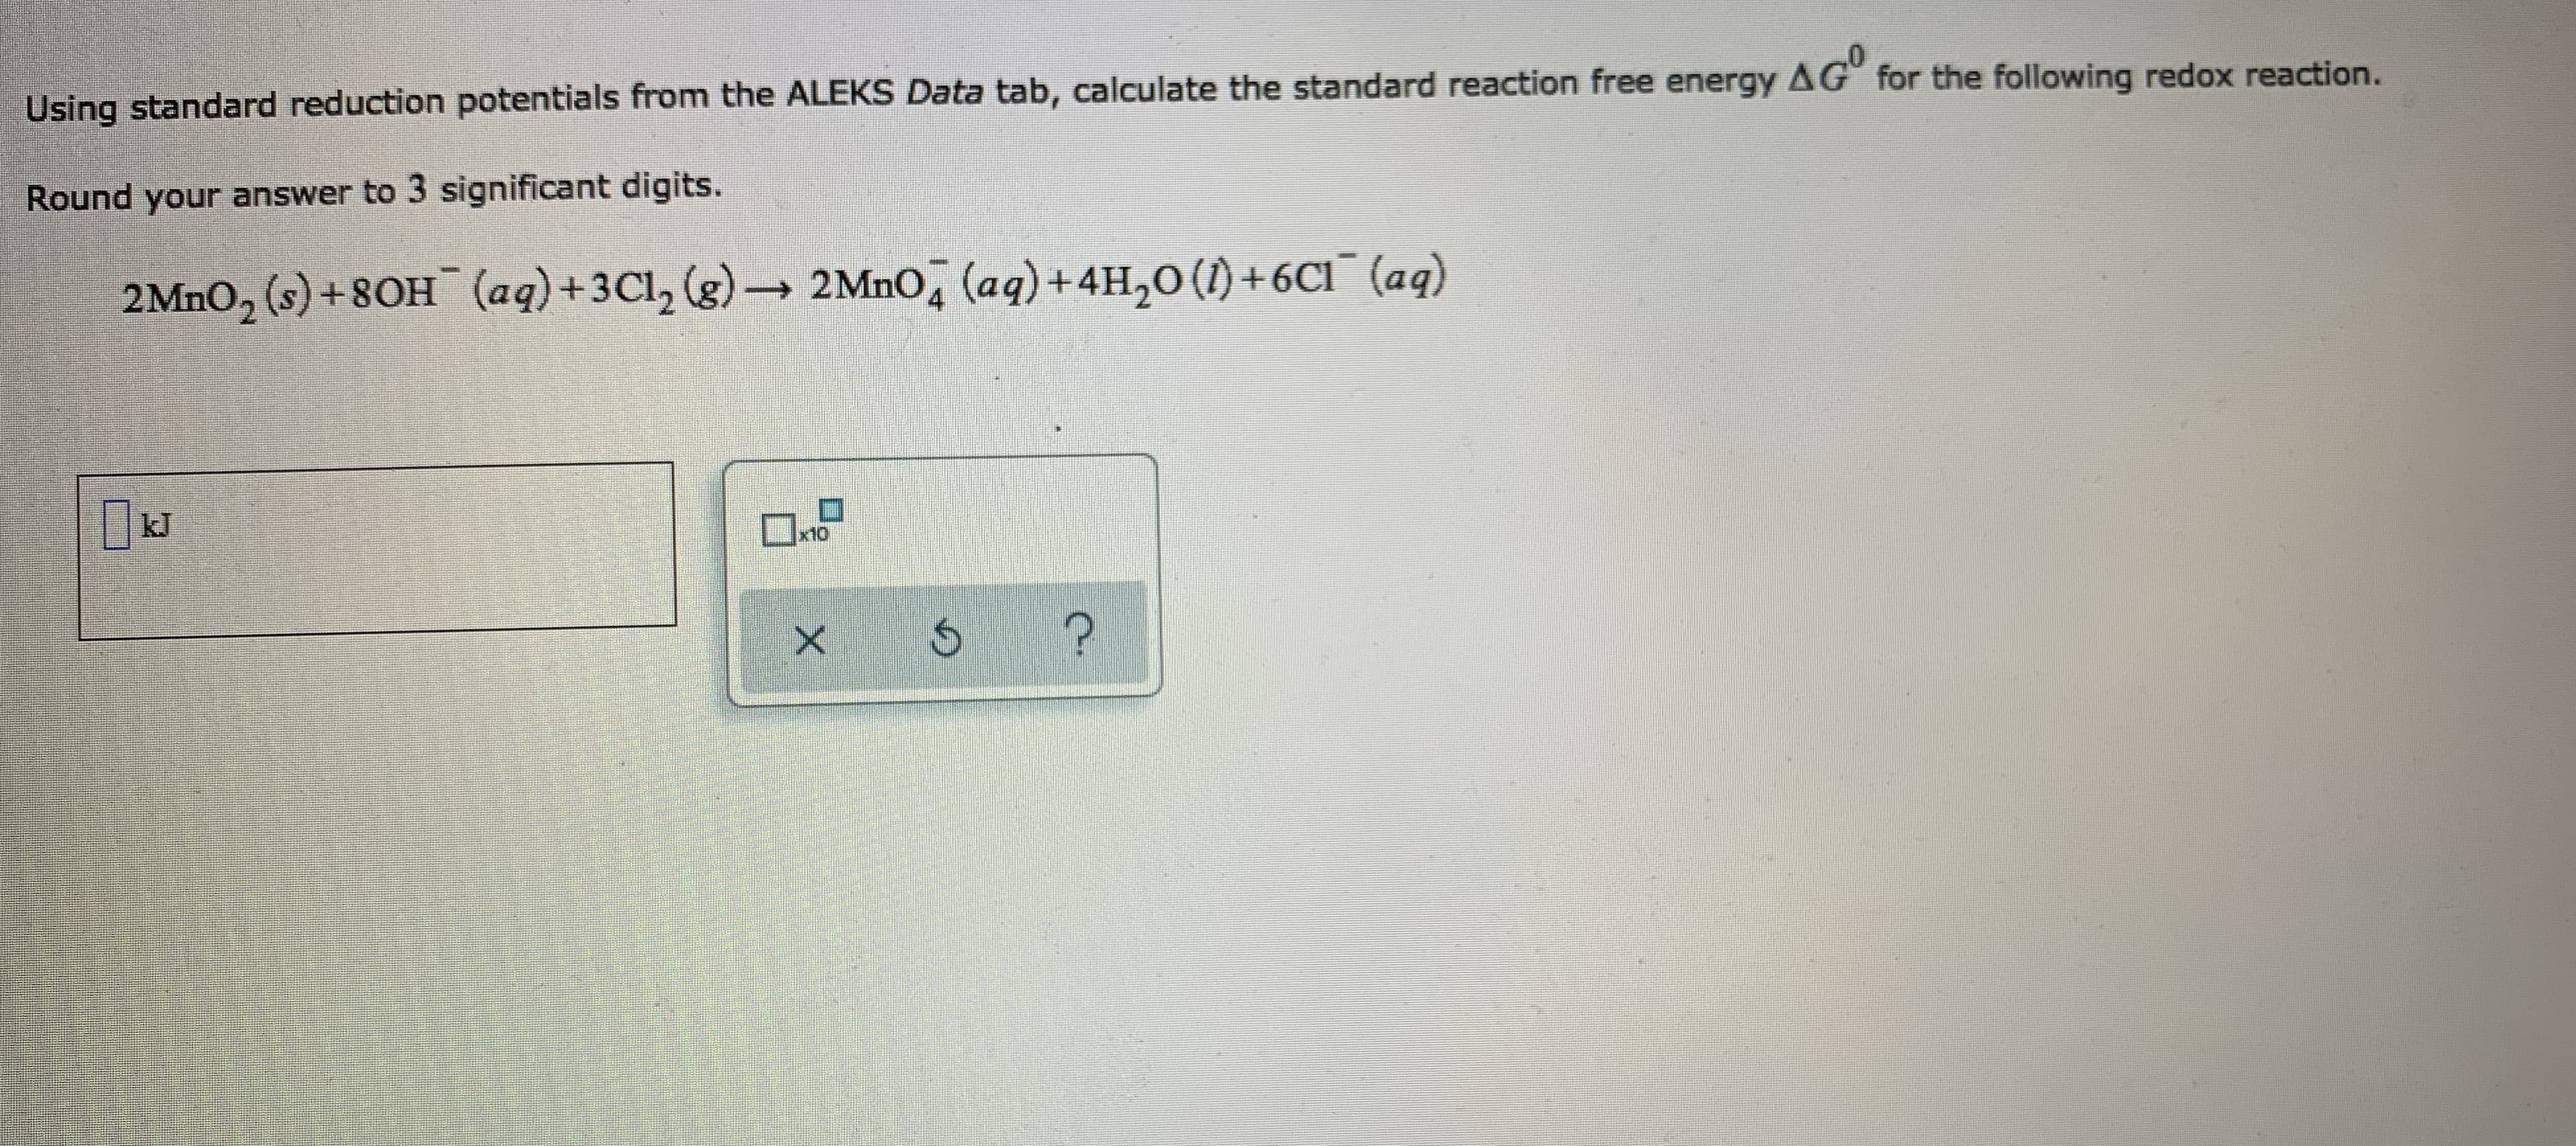 Using standard reduction potentials from the ALEKS Data tab, calculate the standard reaction free energy AG for the following redox reaction.
Round your answer to 3 significant digits.
2MNO, (s) +8OH (aq)+3Cl, (g)→ 2MNO, (aq)+4H,0 (1) +6C1¯ (aq)
kJ
x10
